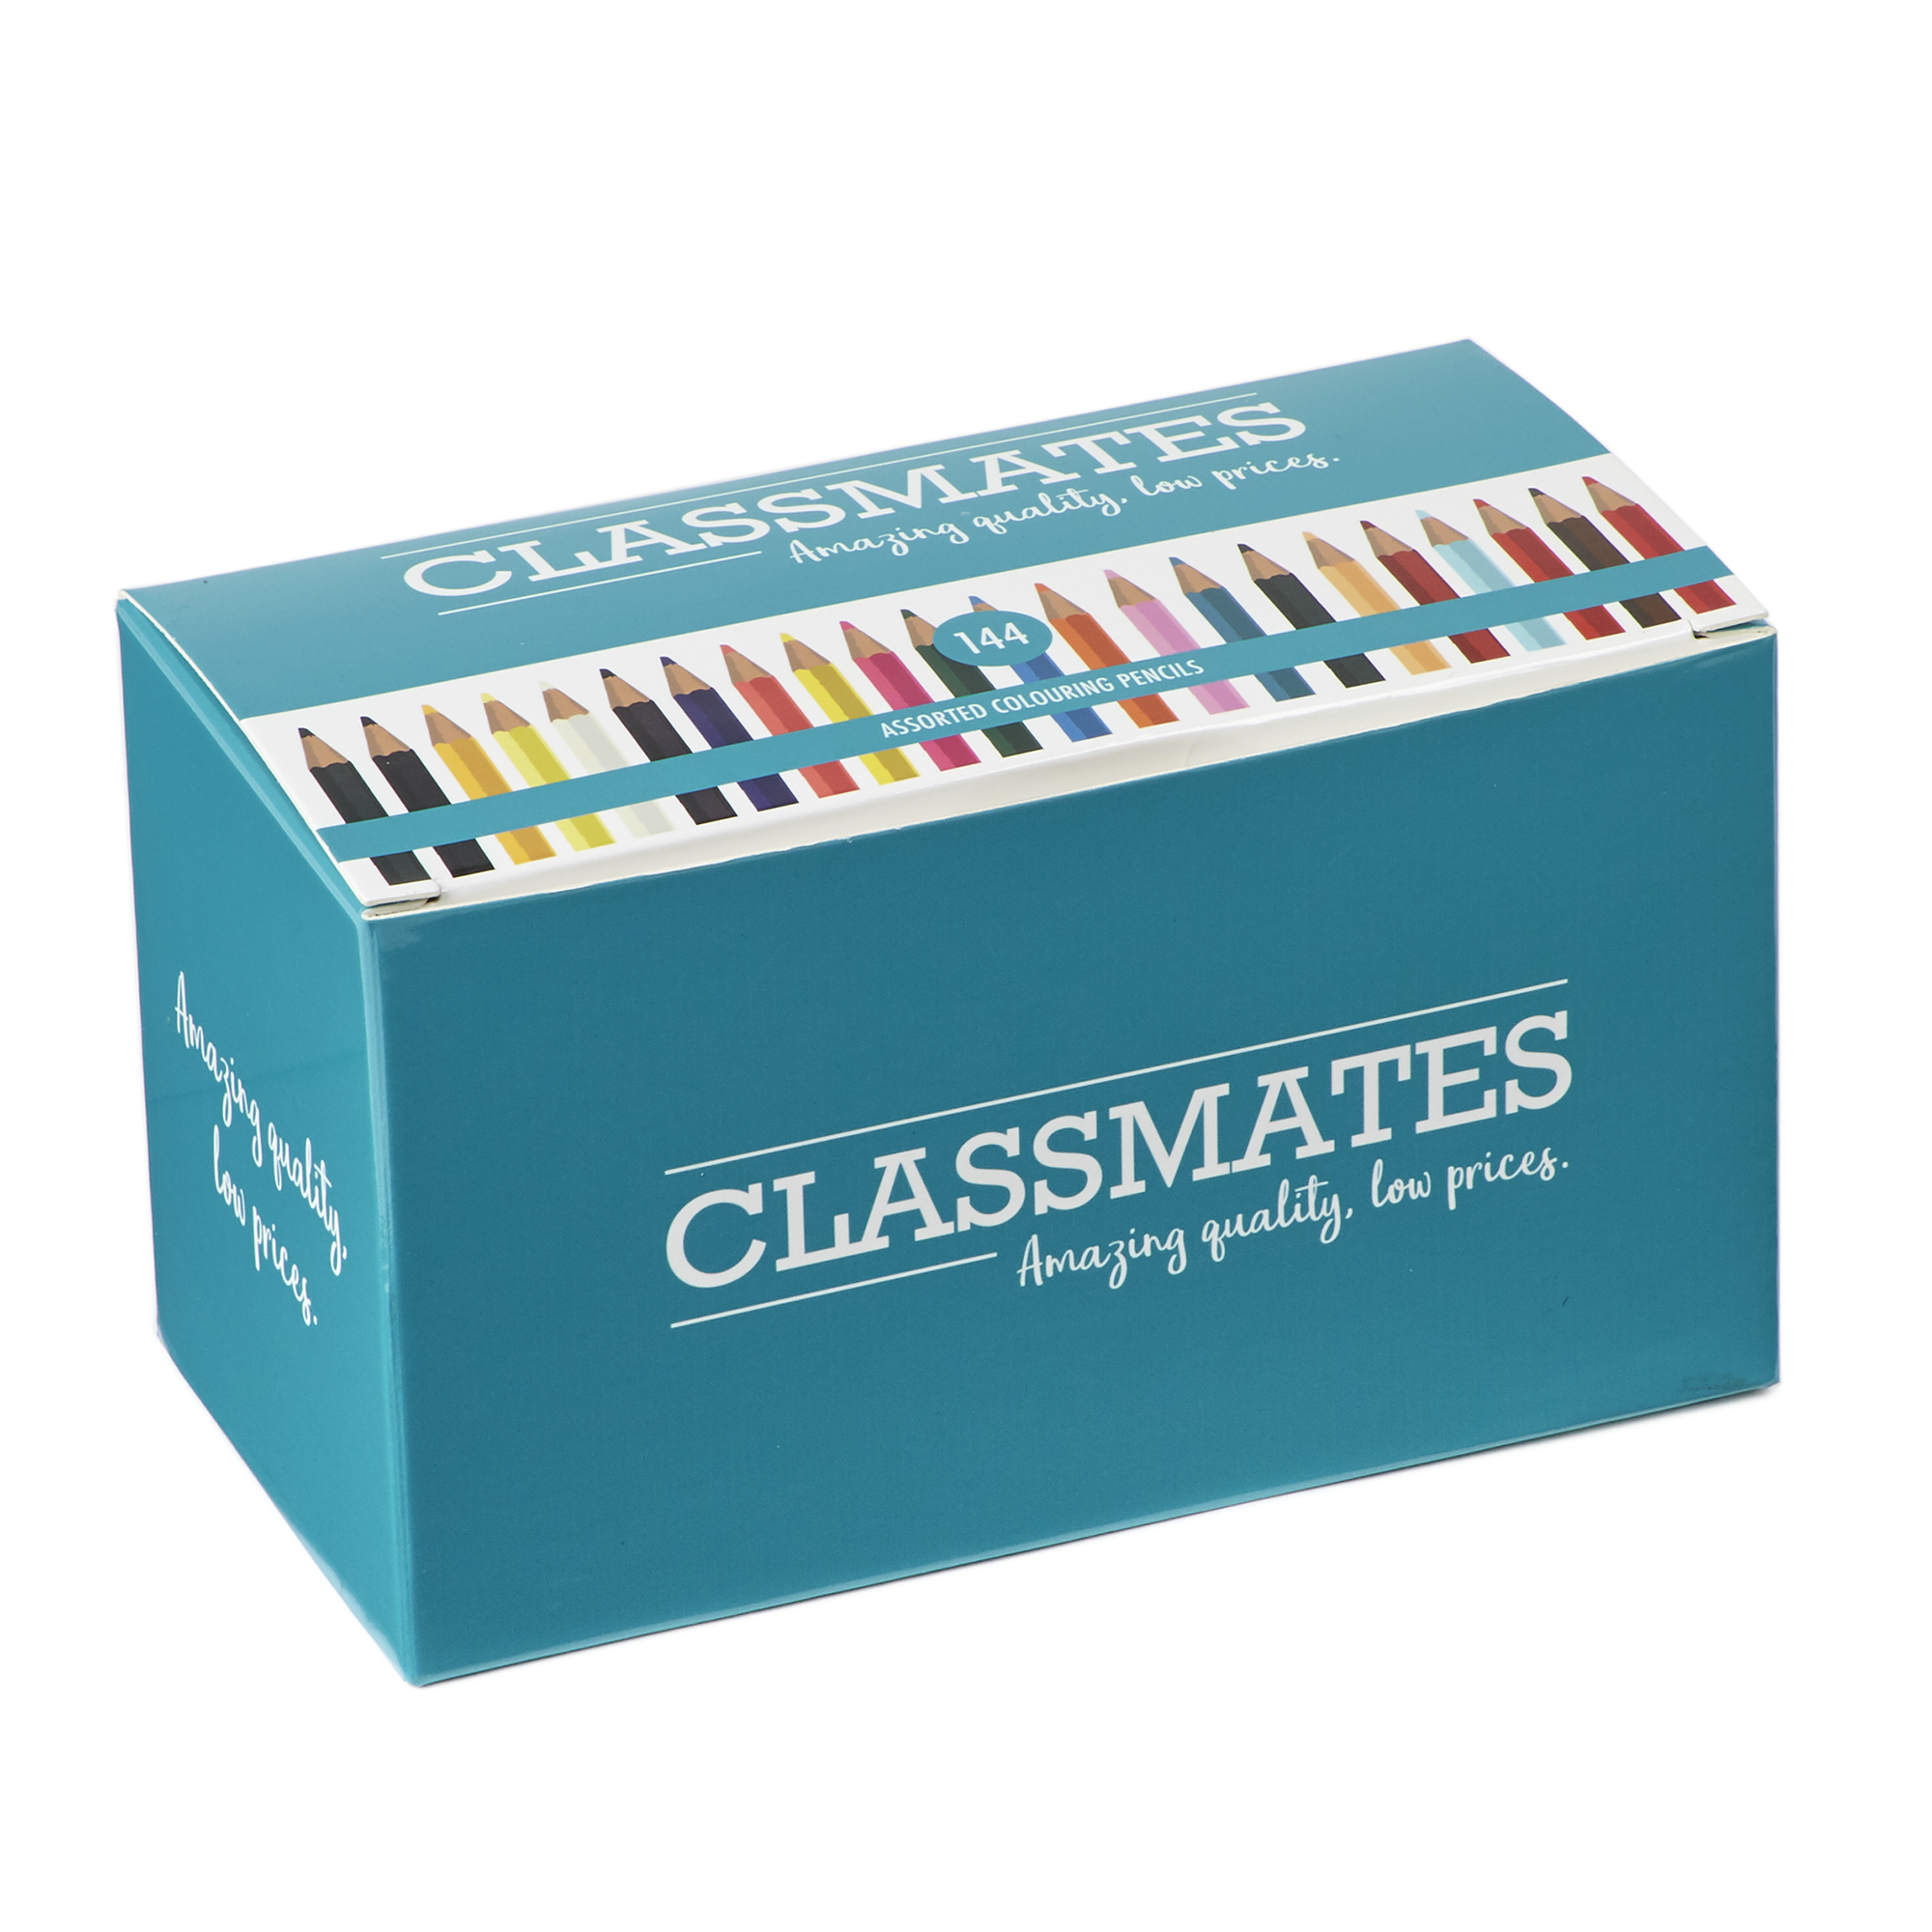 Pack of 504 Classmates Assorted Colouring Pencils